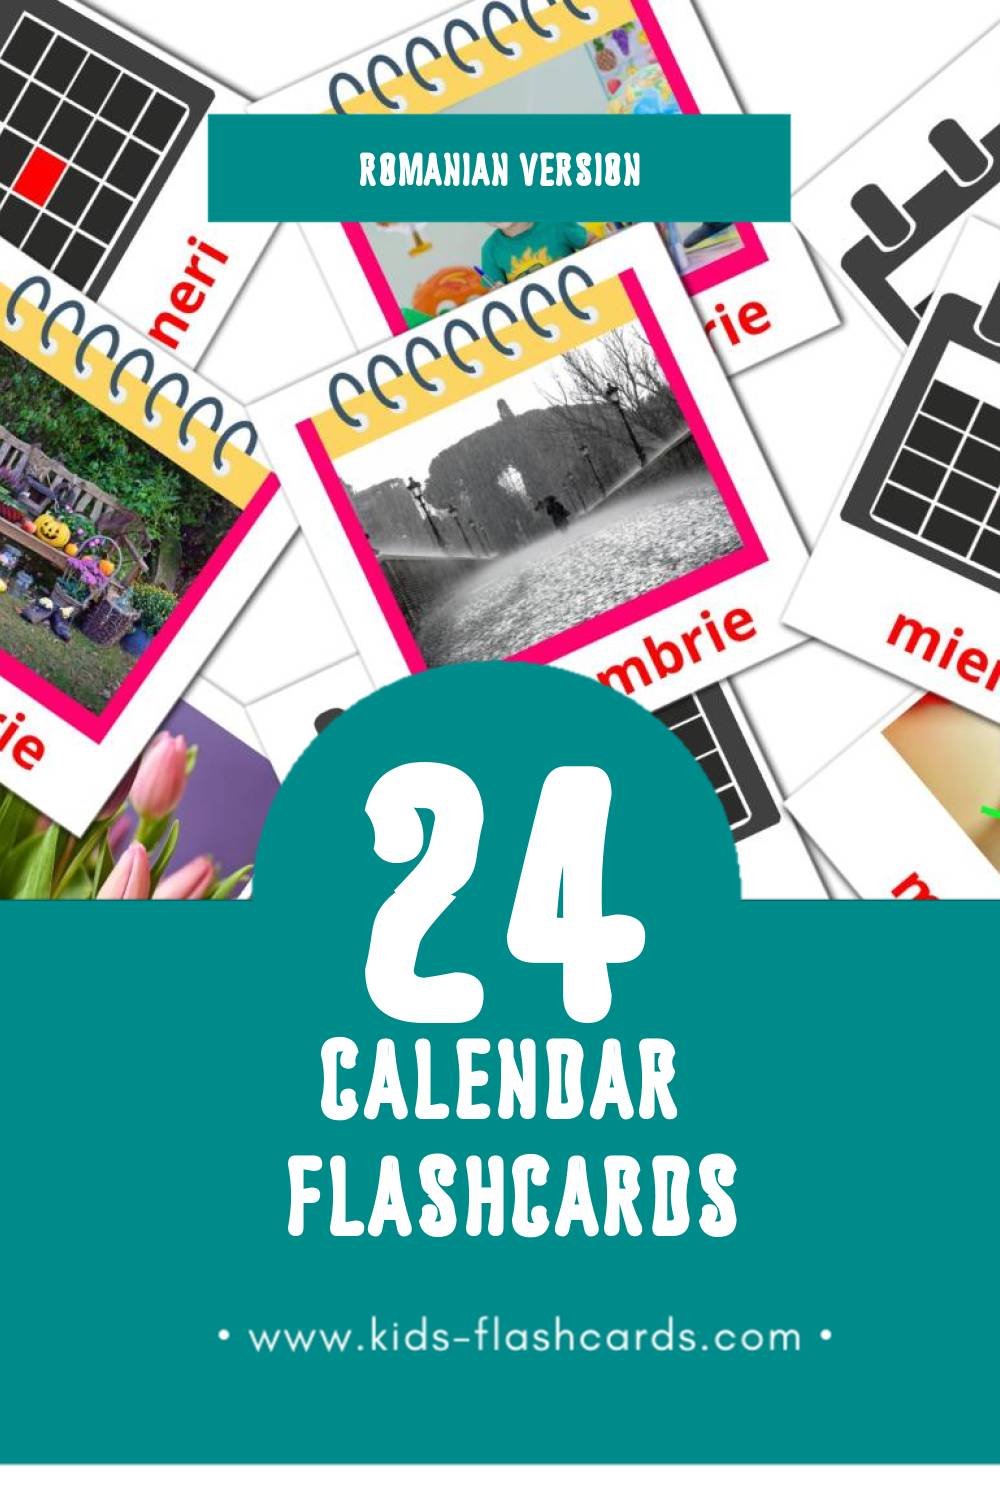 Visual Calendar Flashcards for Toddlers (24 cards in Romanian)